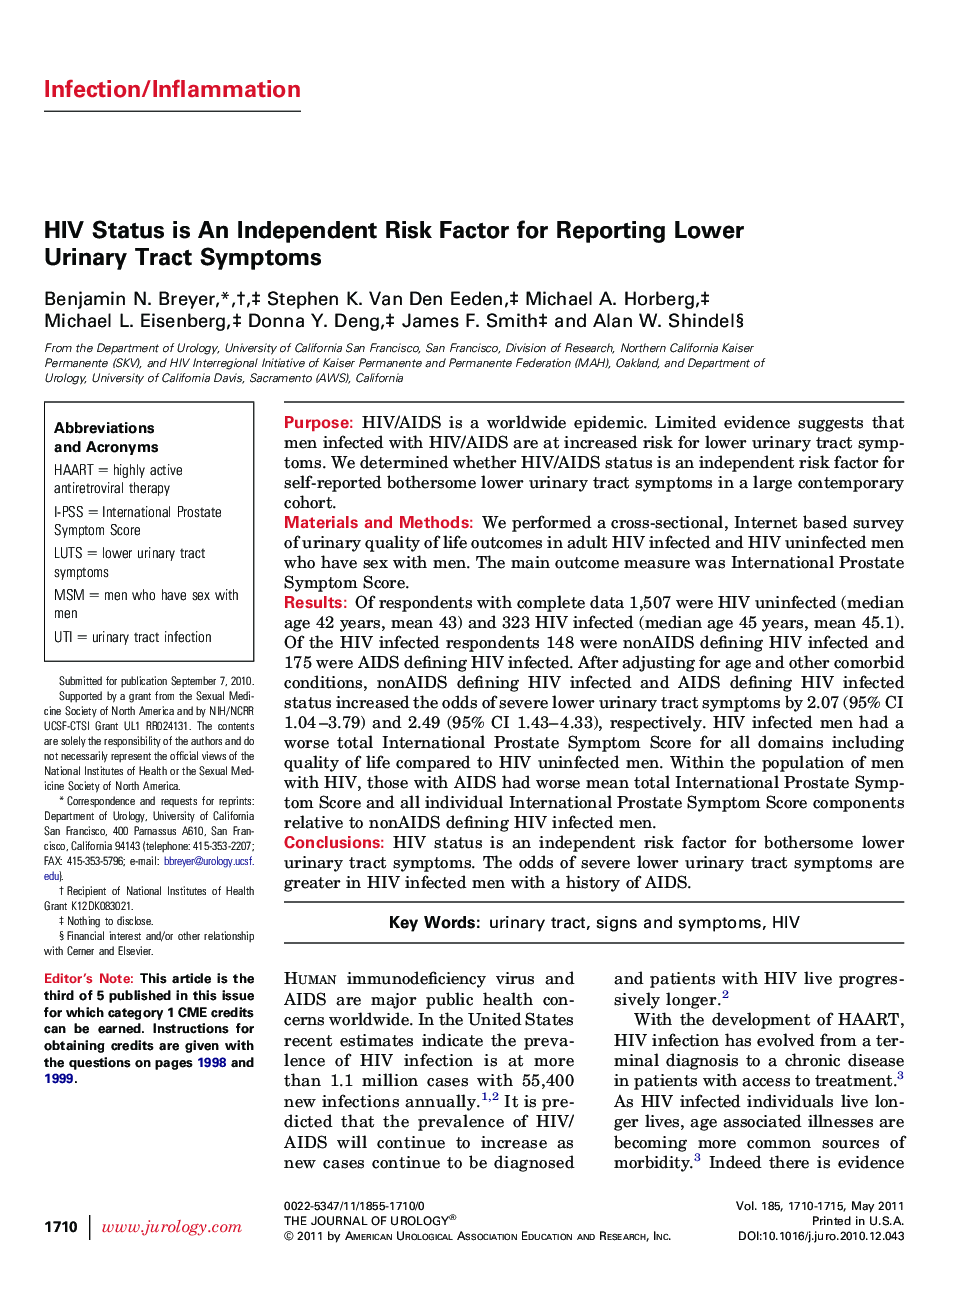 HIV Status is An Independent Risk Factor for Reporting Lower Urinary Tract Symptoms